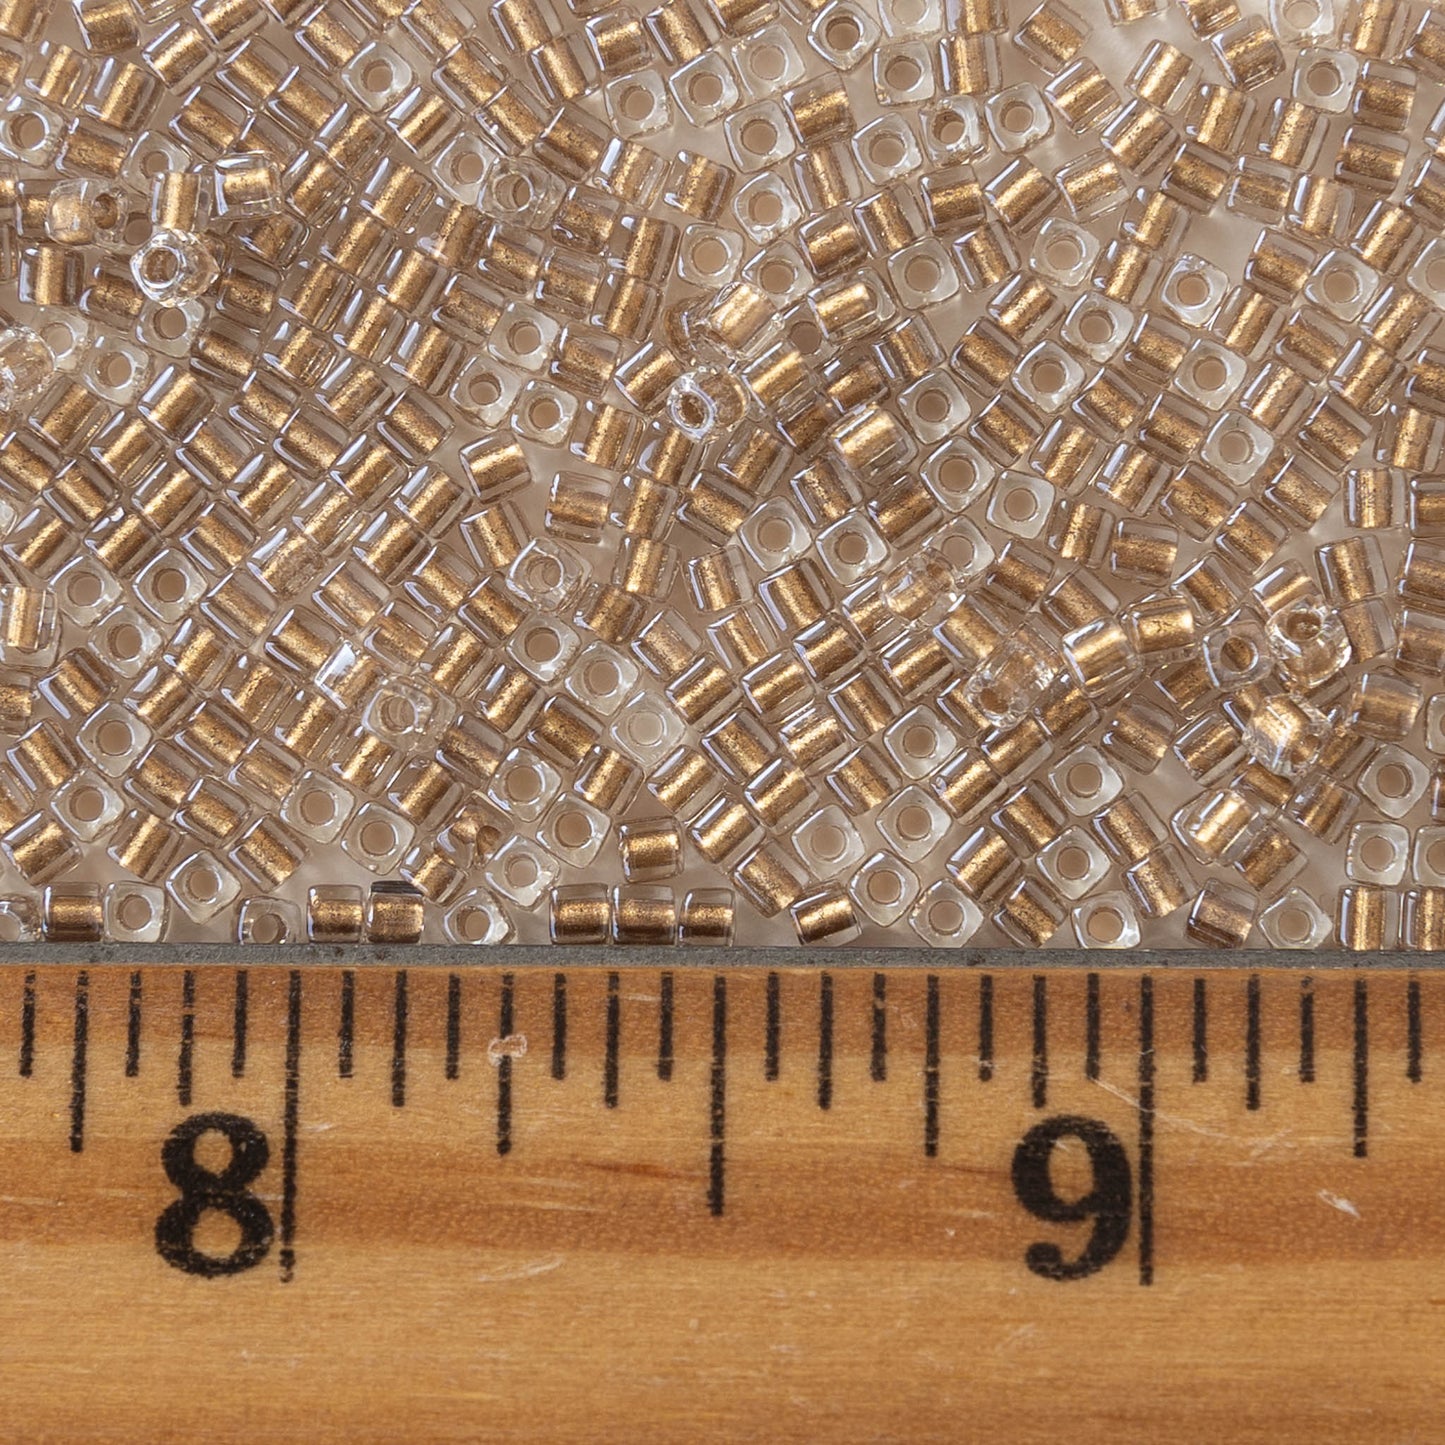 Load image into Gallery viewer, 1.8mm Miyuki Cube Beads  - Gold Lined Crystal - 20 grams
